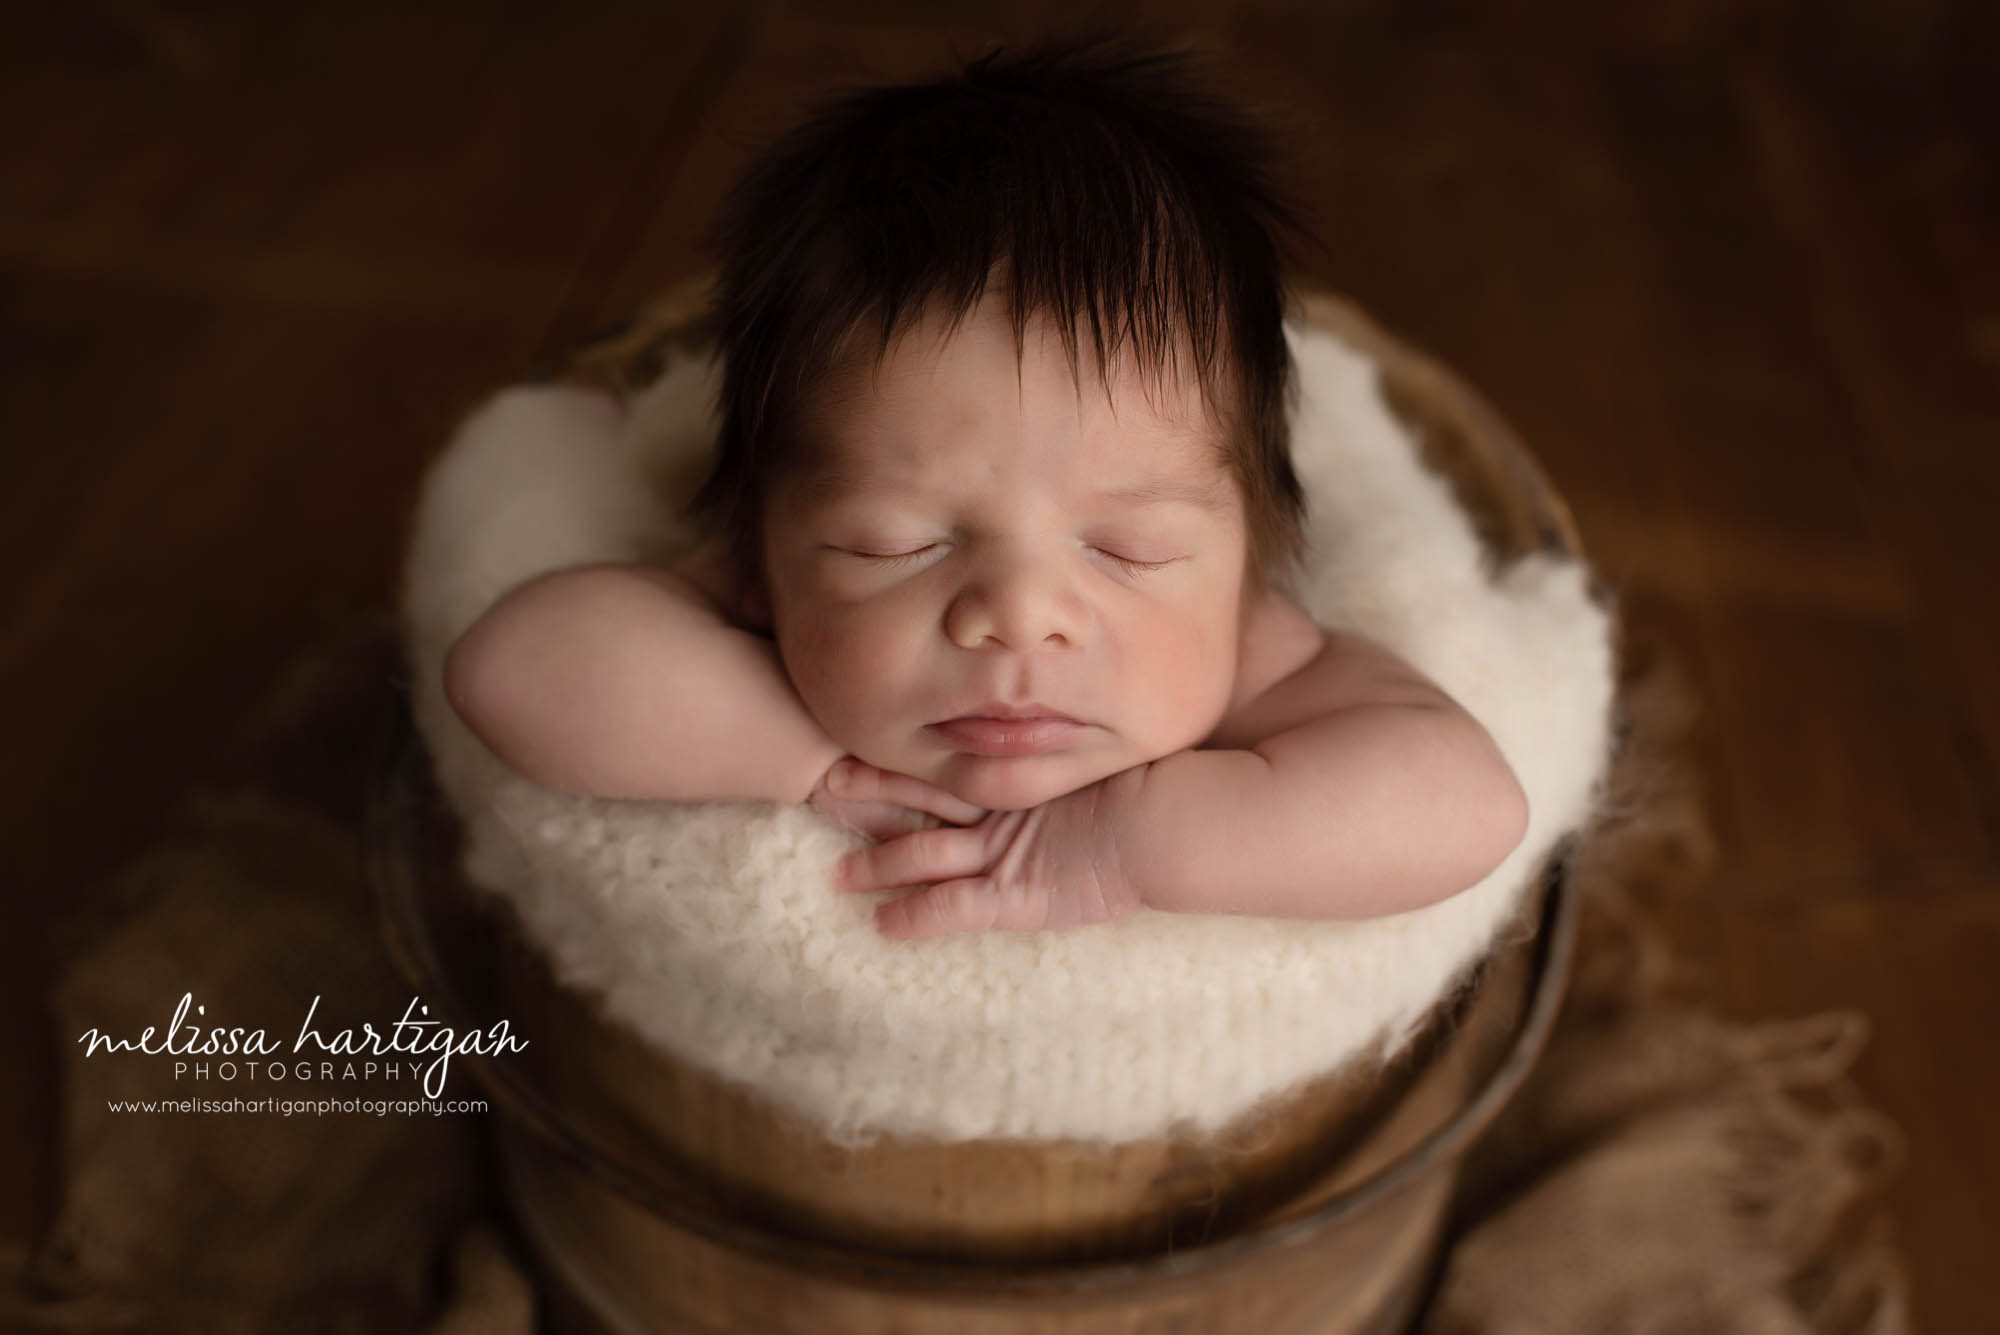 newborn baby boy posed in wooden barrel bucket with cream layer baby boy with head full of hair